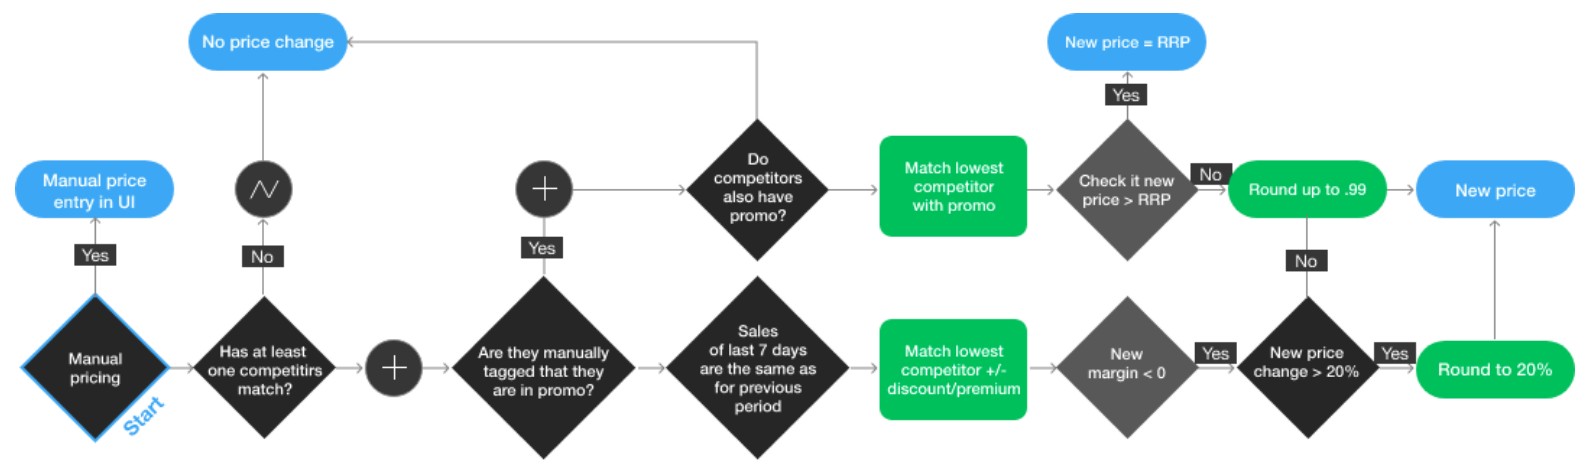 pricing-decision-tree-competera